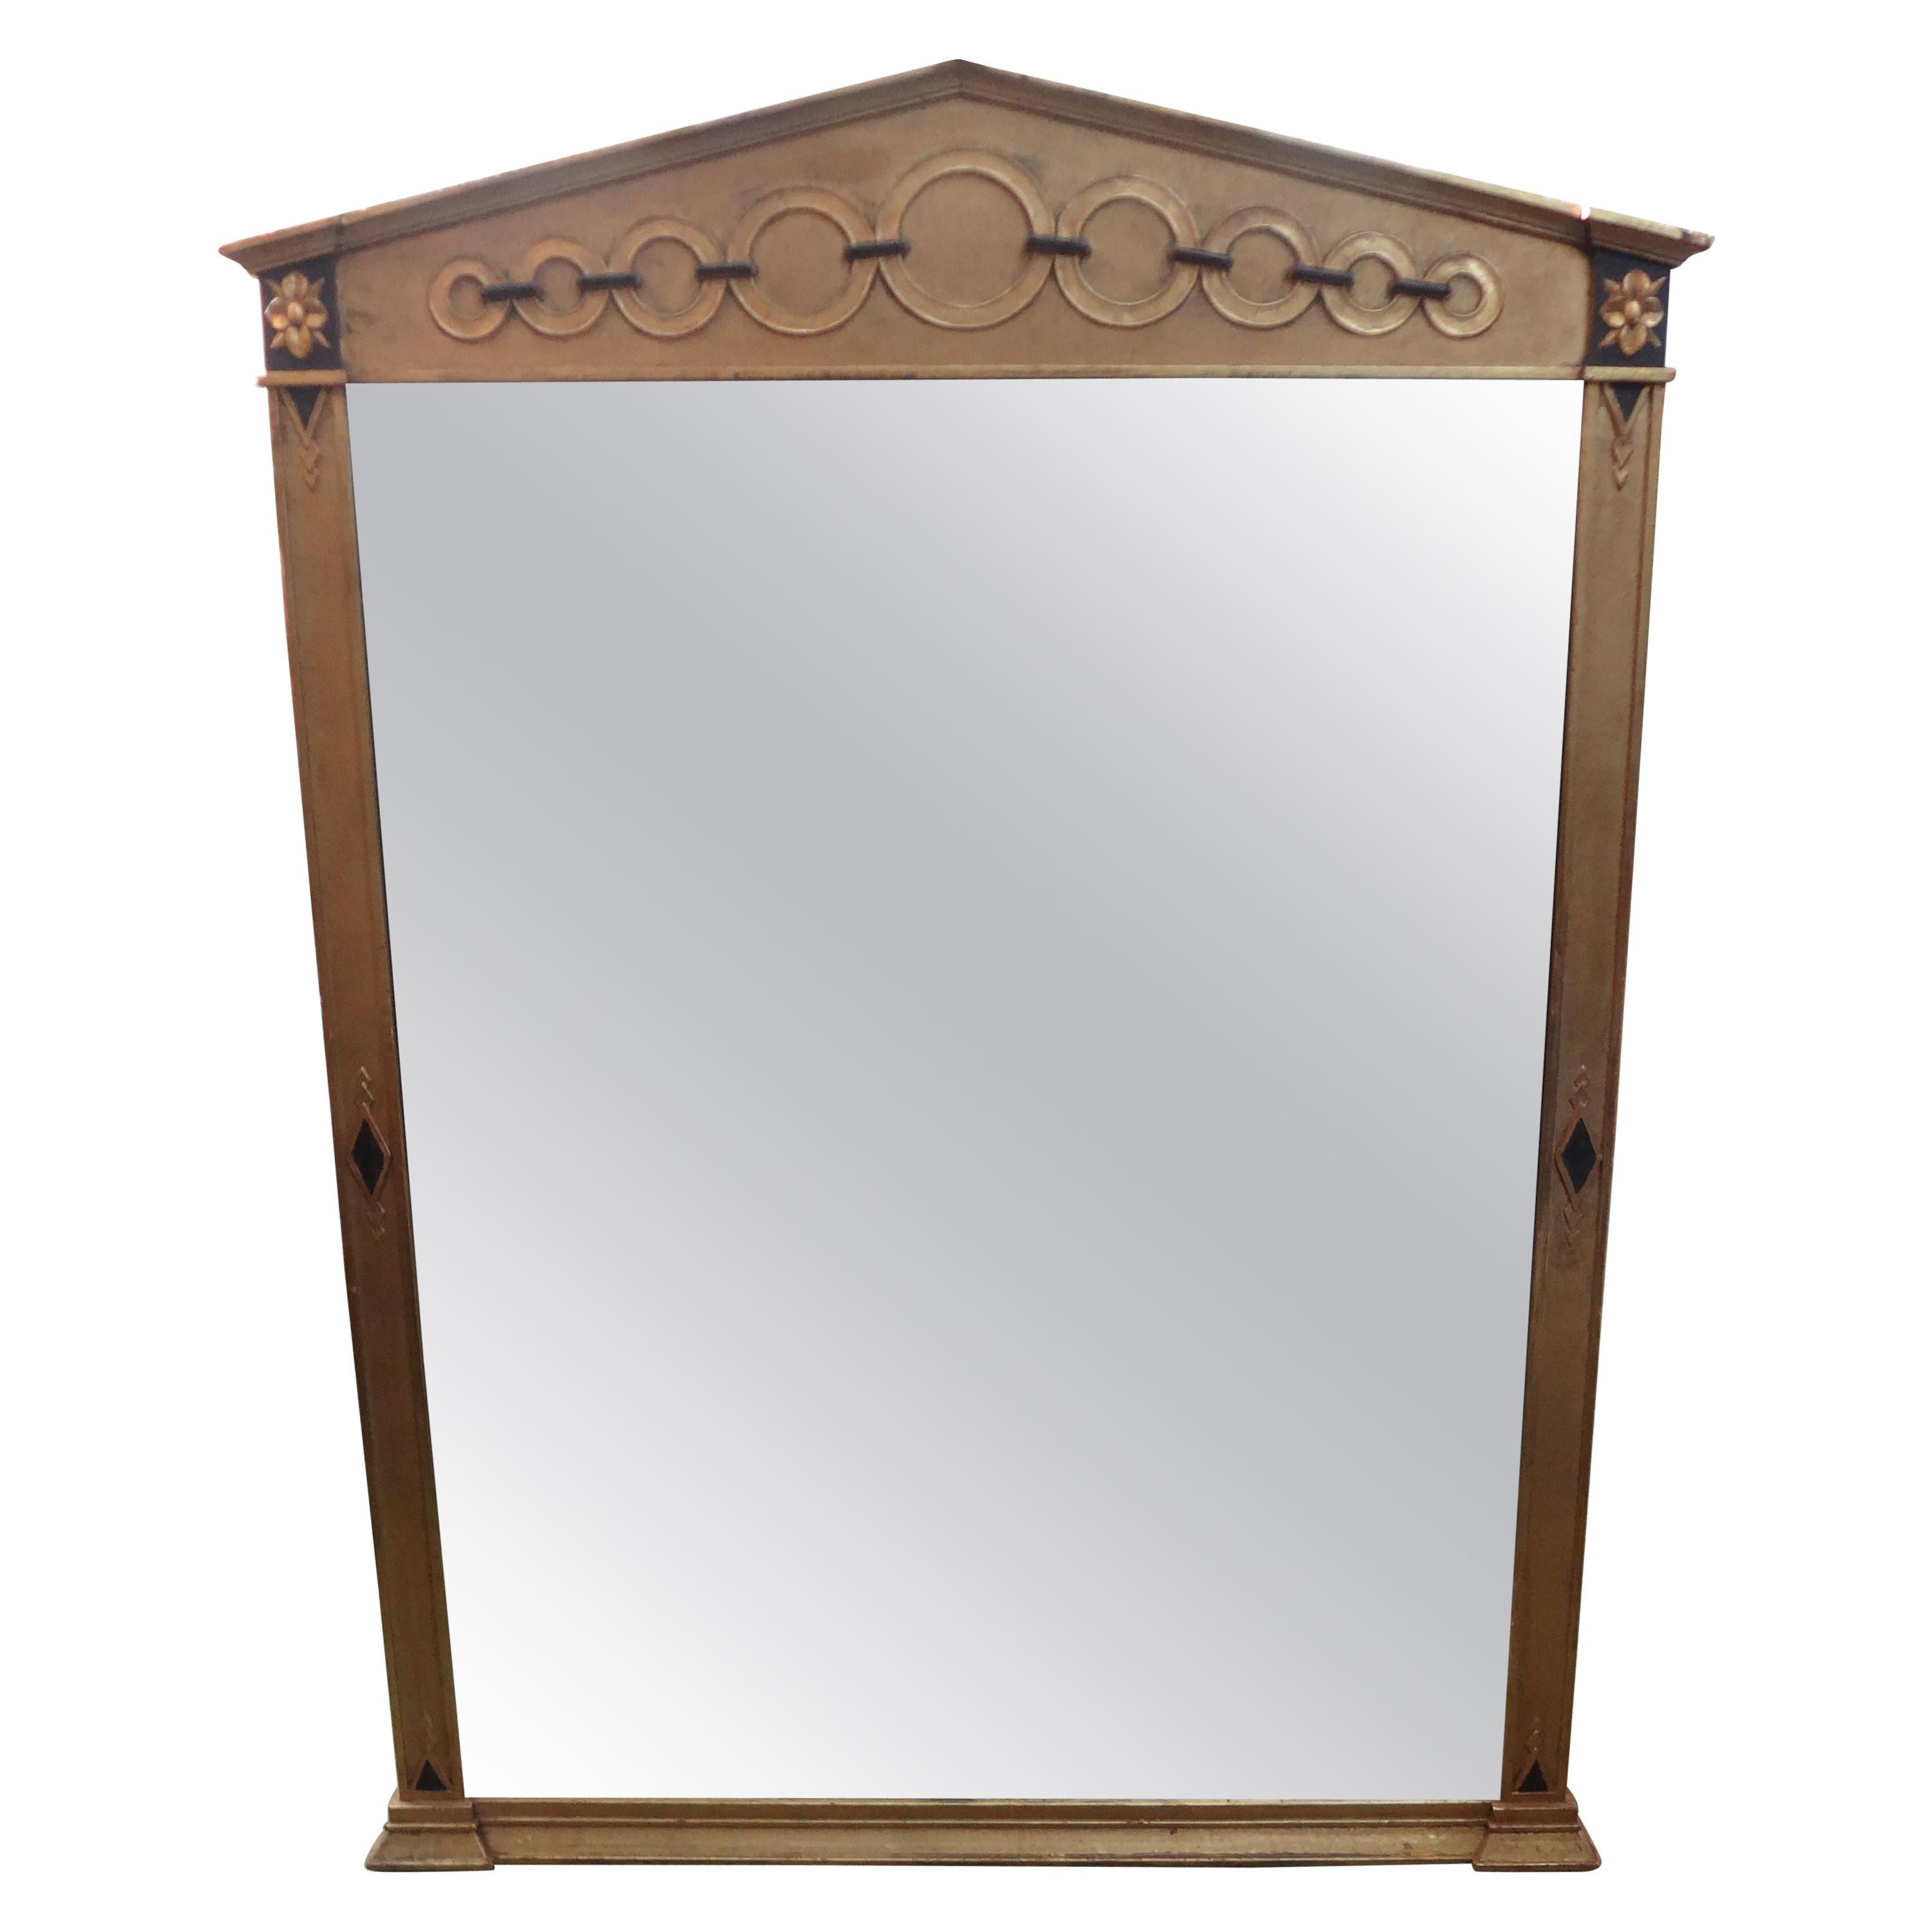 Italian Neoclassical style giltwood mirror.
Stunning vintage Italian Neoclassical style giltwood mirror. This lovely Italian ebonized and gilt wood mirror would look great over a console table, credenza, commode, chest or buffet. Nice patina!